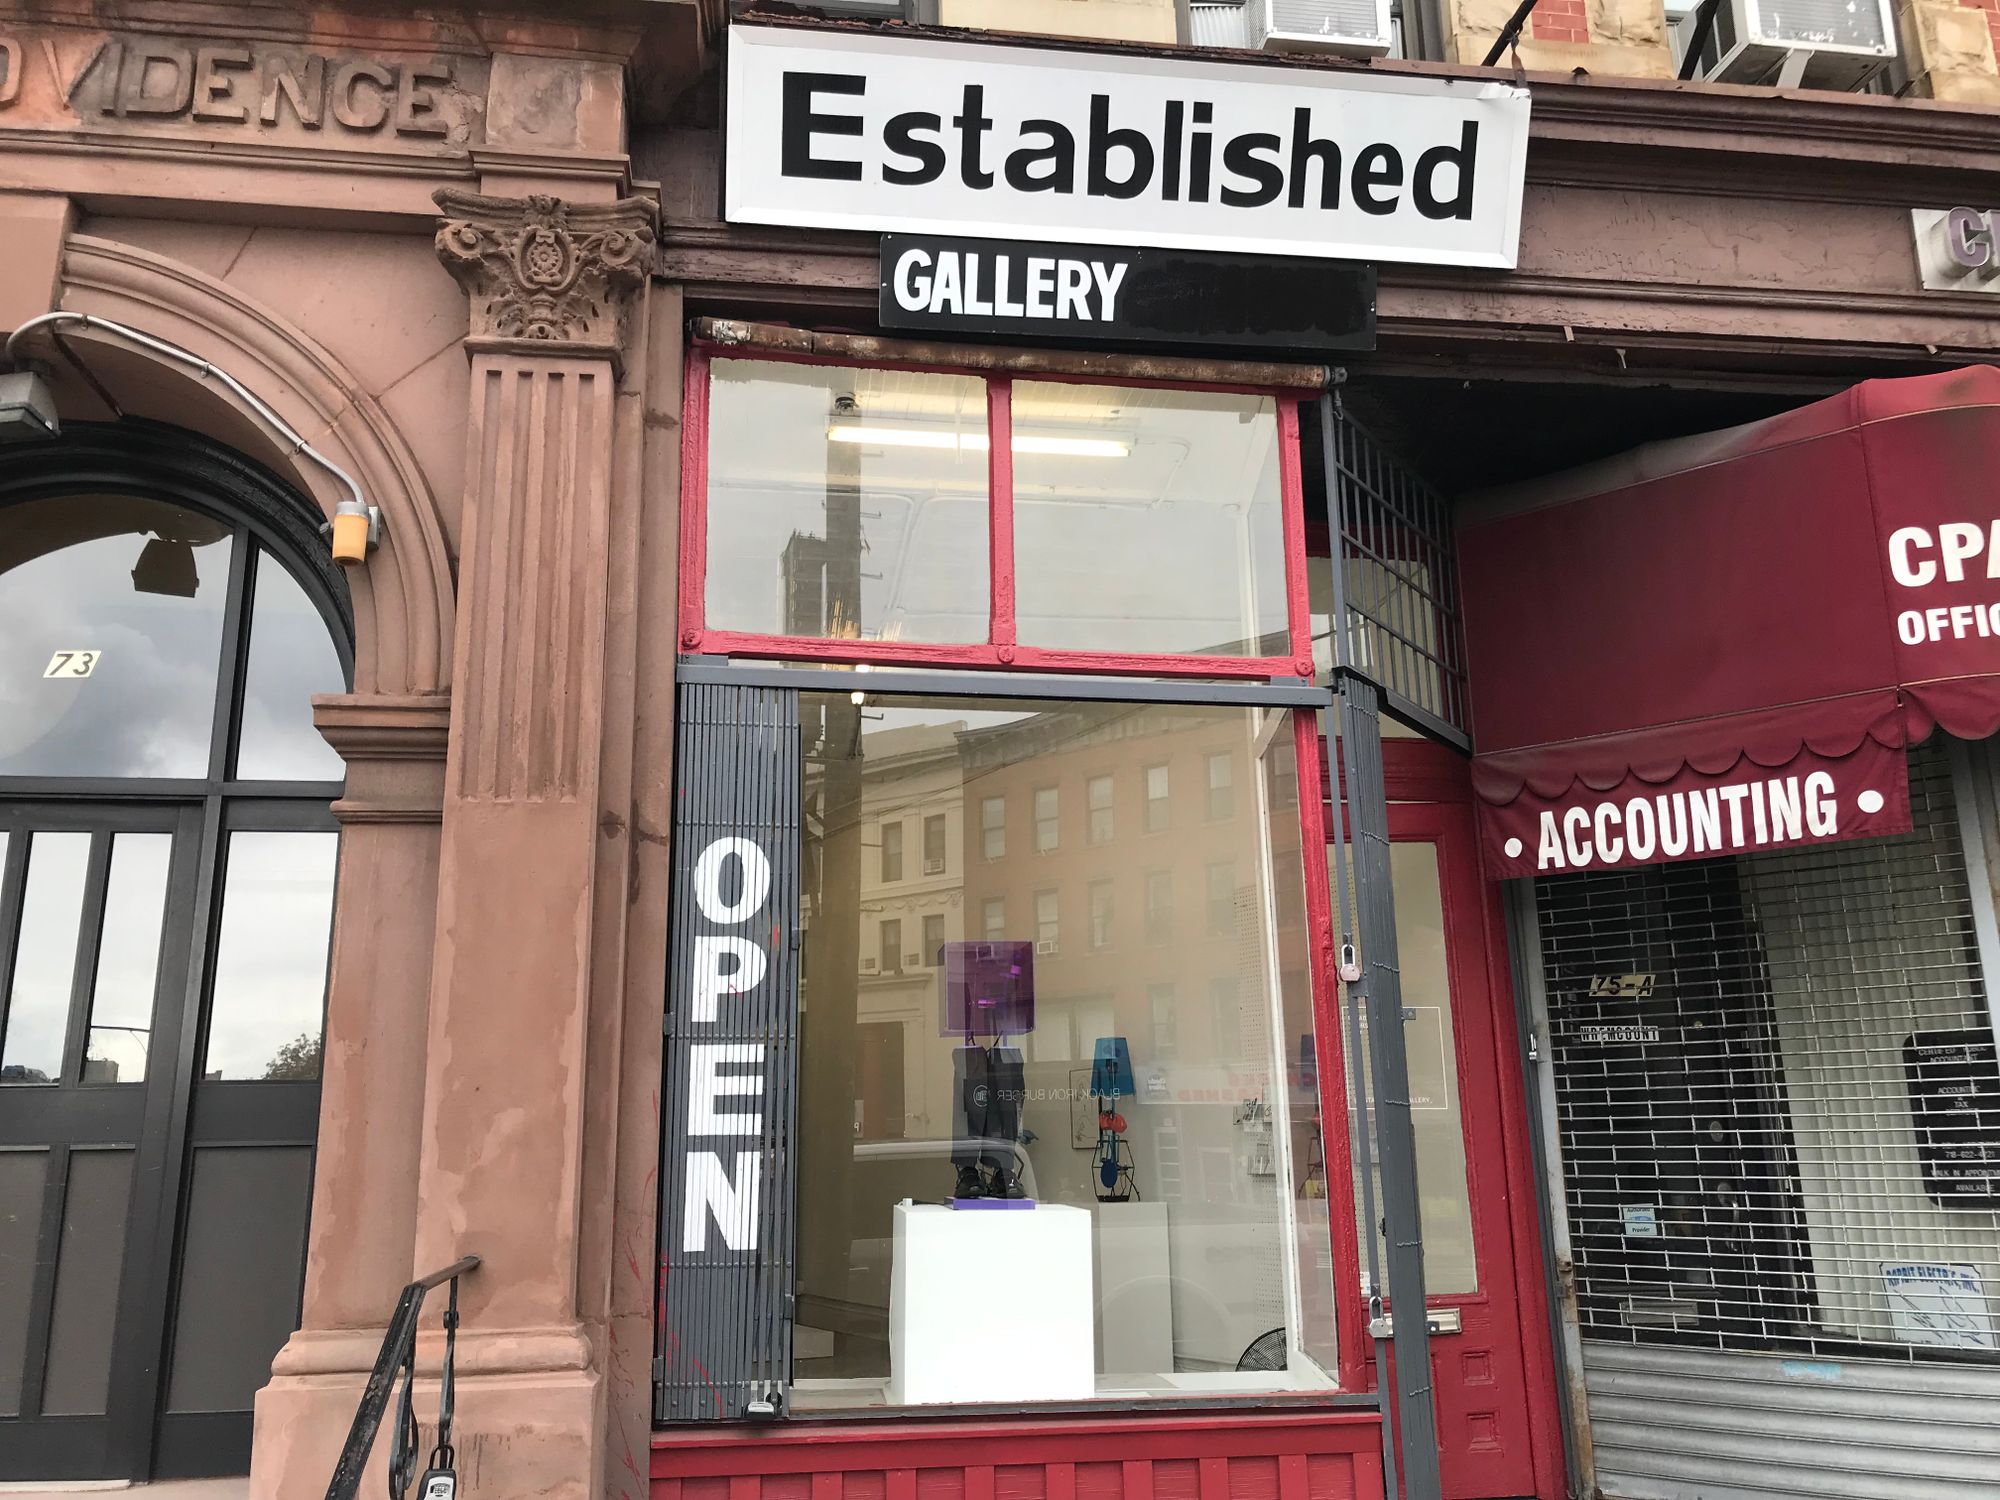 Meet The New ‘Established Gallery’ In Prospect Heights